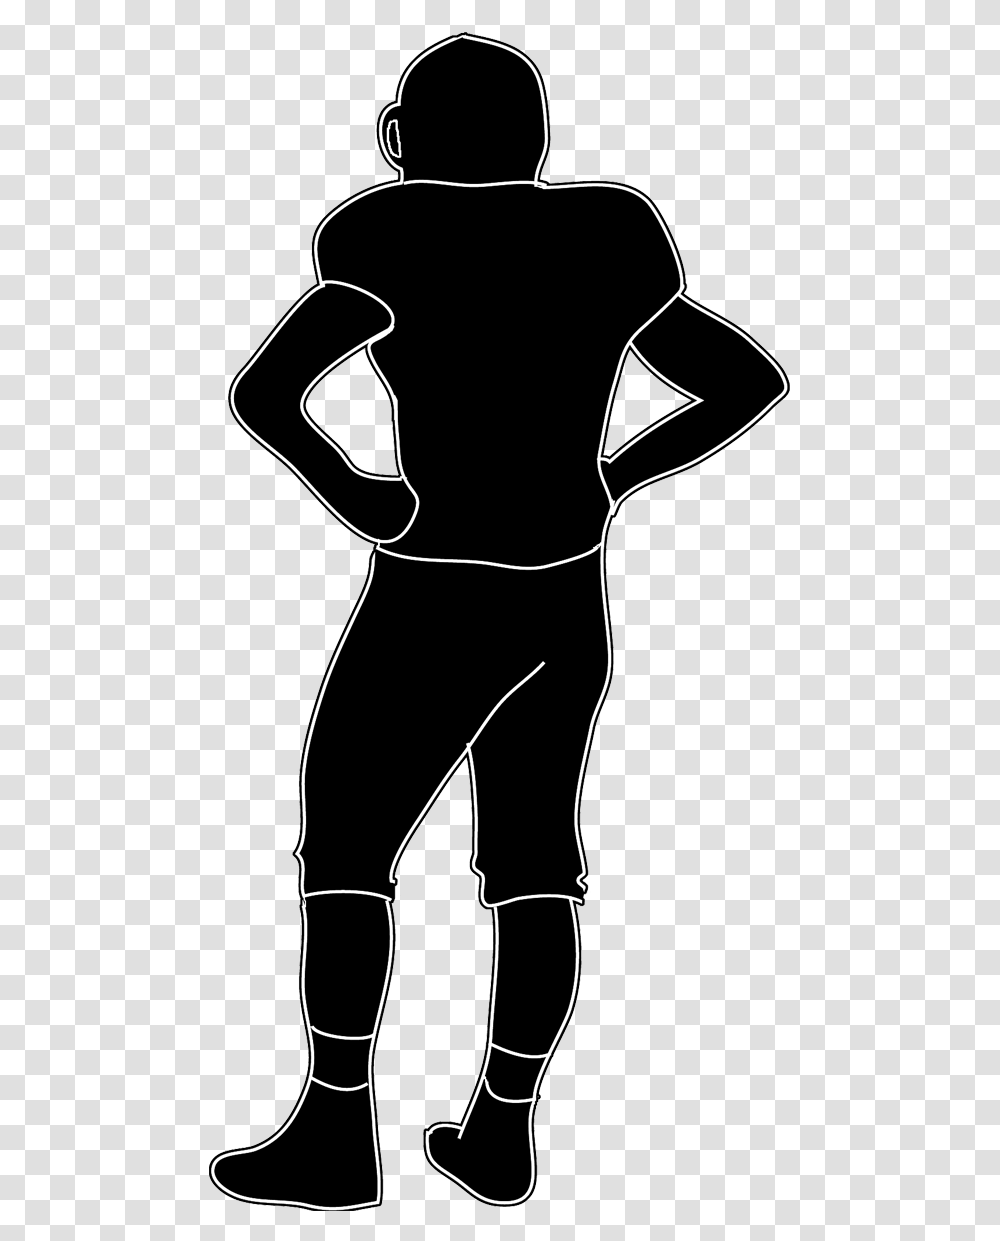 Silhouette Football Player Back Of Football Players, Stencil, Apparel, Shorts Transparent Png